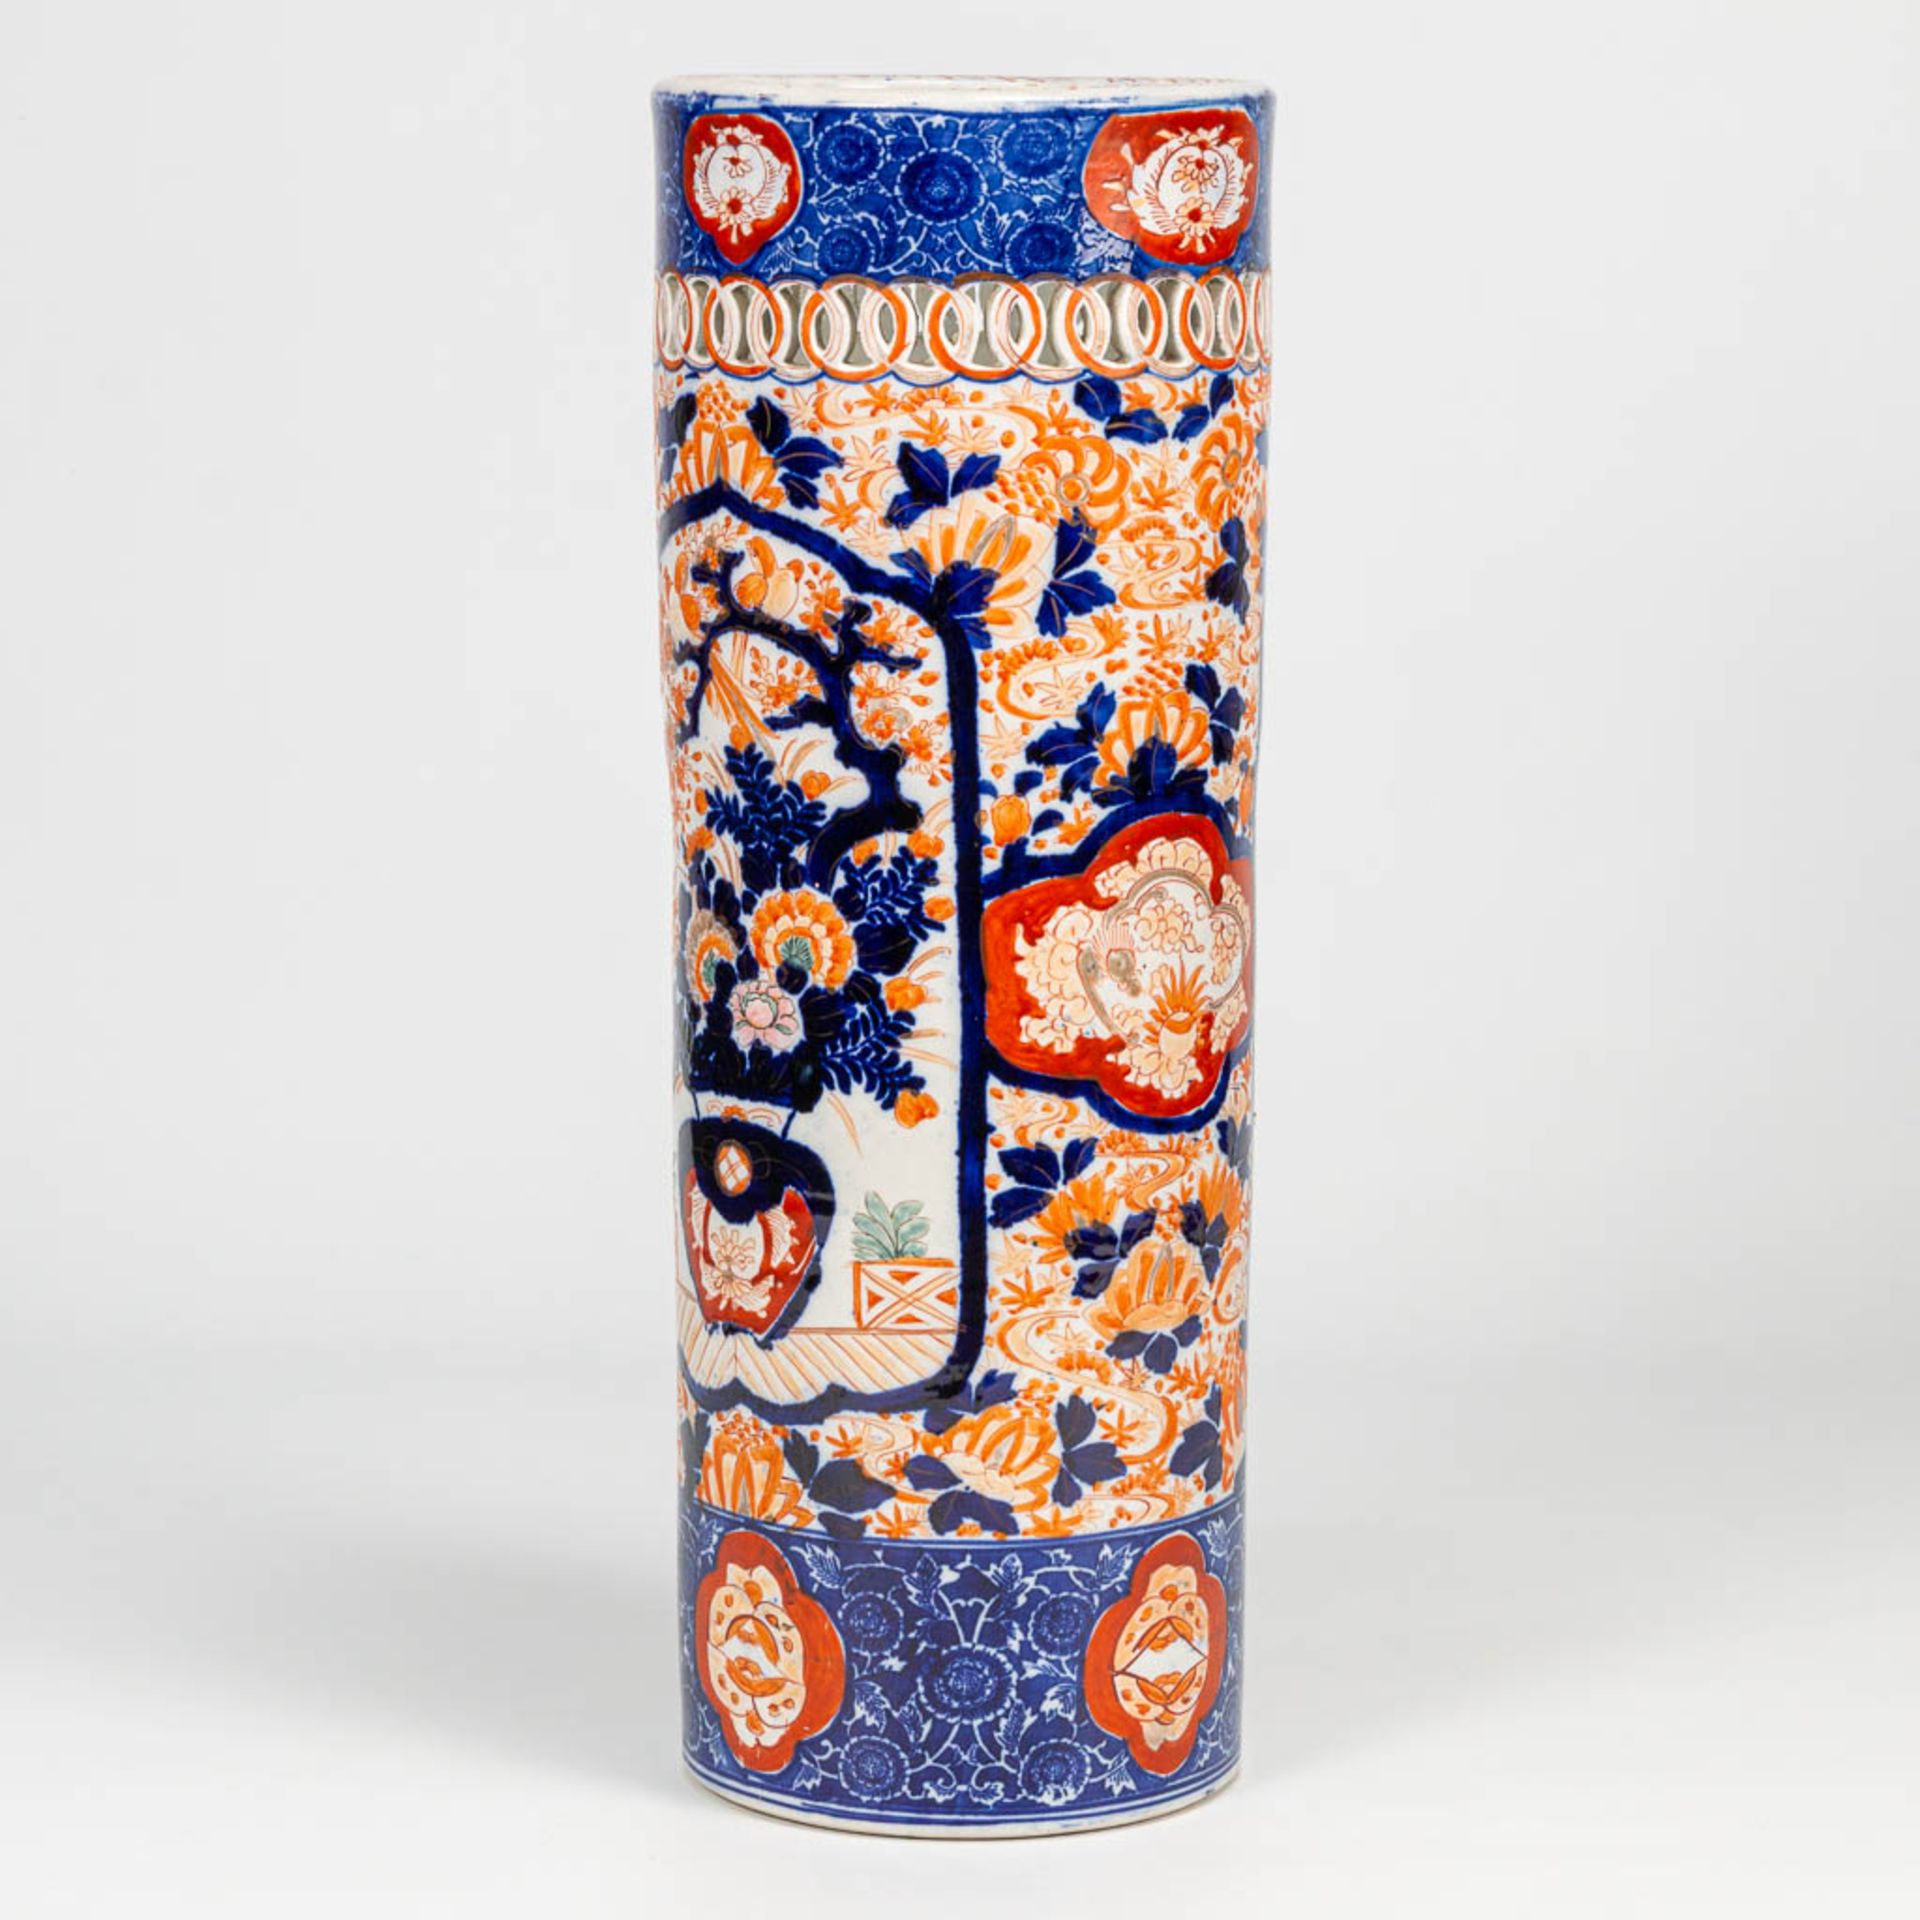 An Imari umbrella stand, vase made of porcelain in Japan. 19th/20th century. (61 x 22 cm) - Image 7 of 17